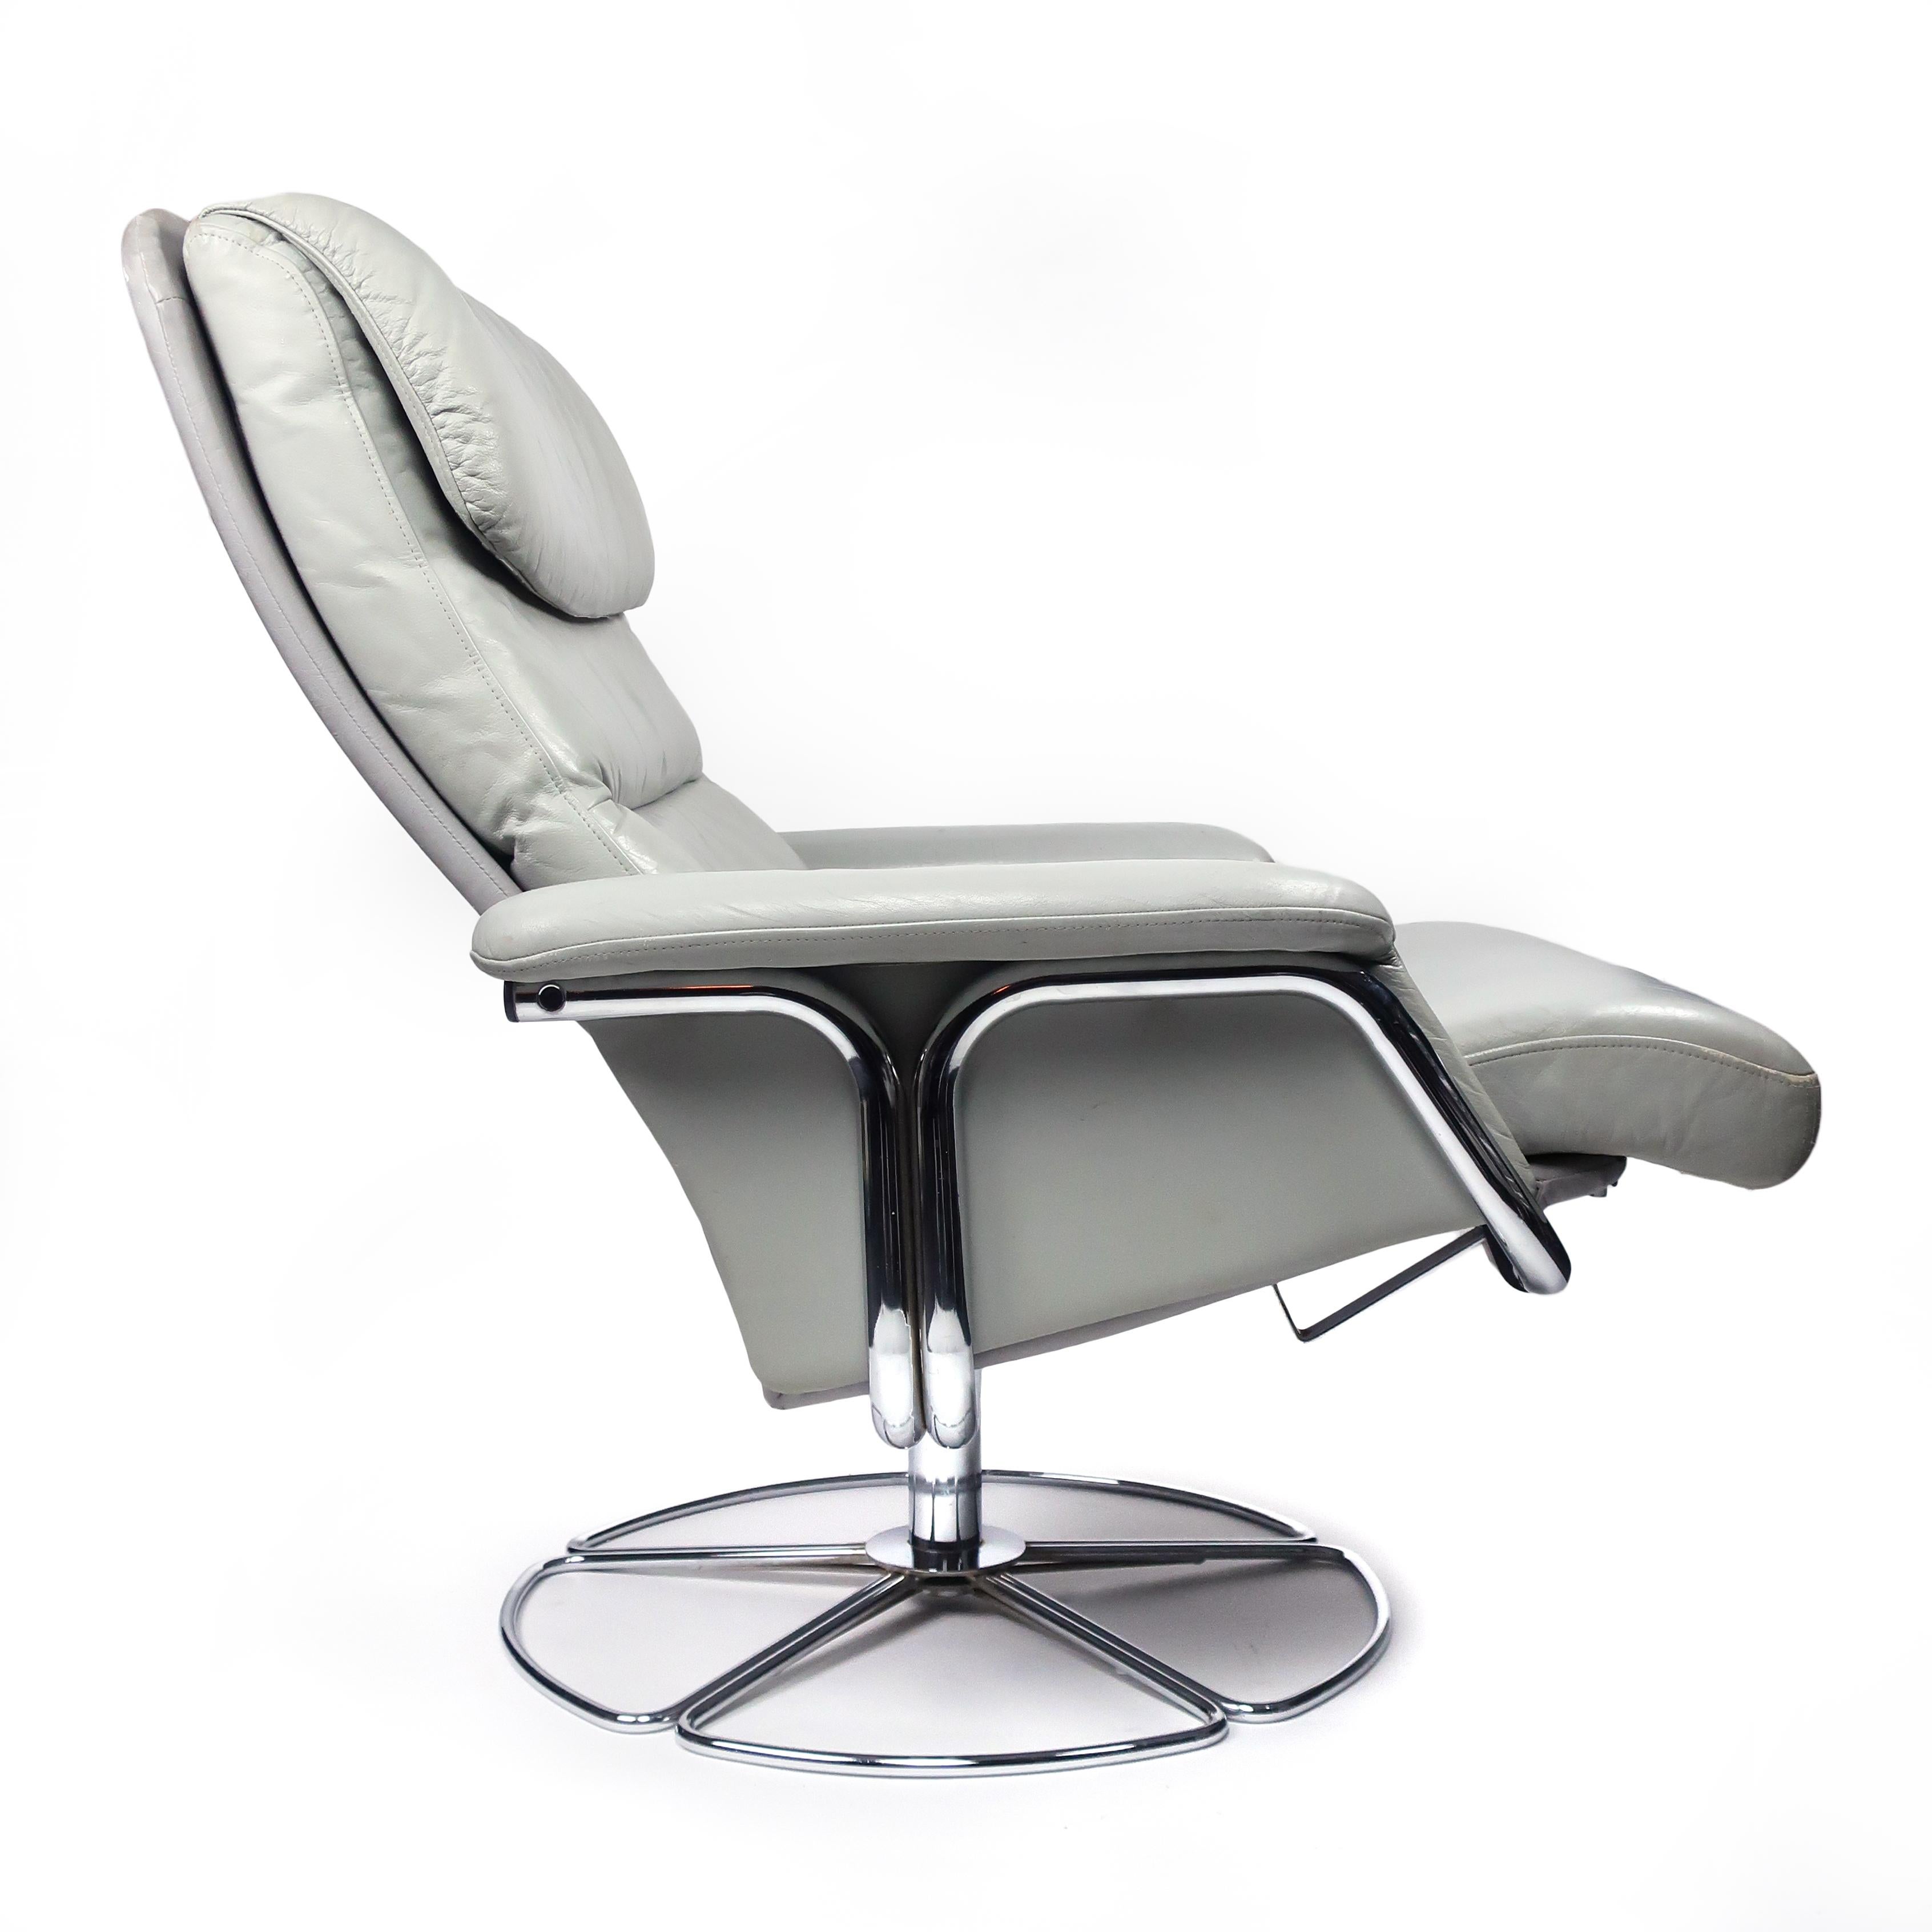 Scandinavian Modern Bruno Mathsson Gray Leather and Chrome Lounge Chair for DUX